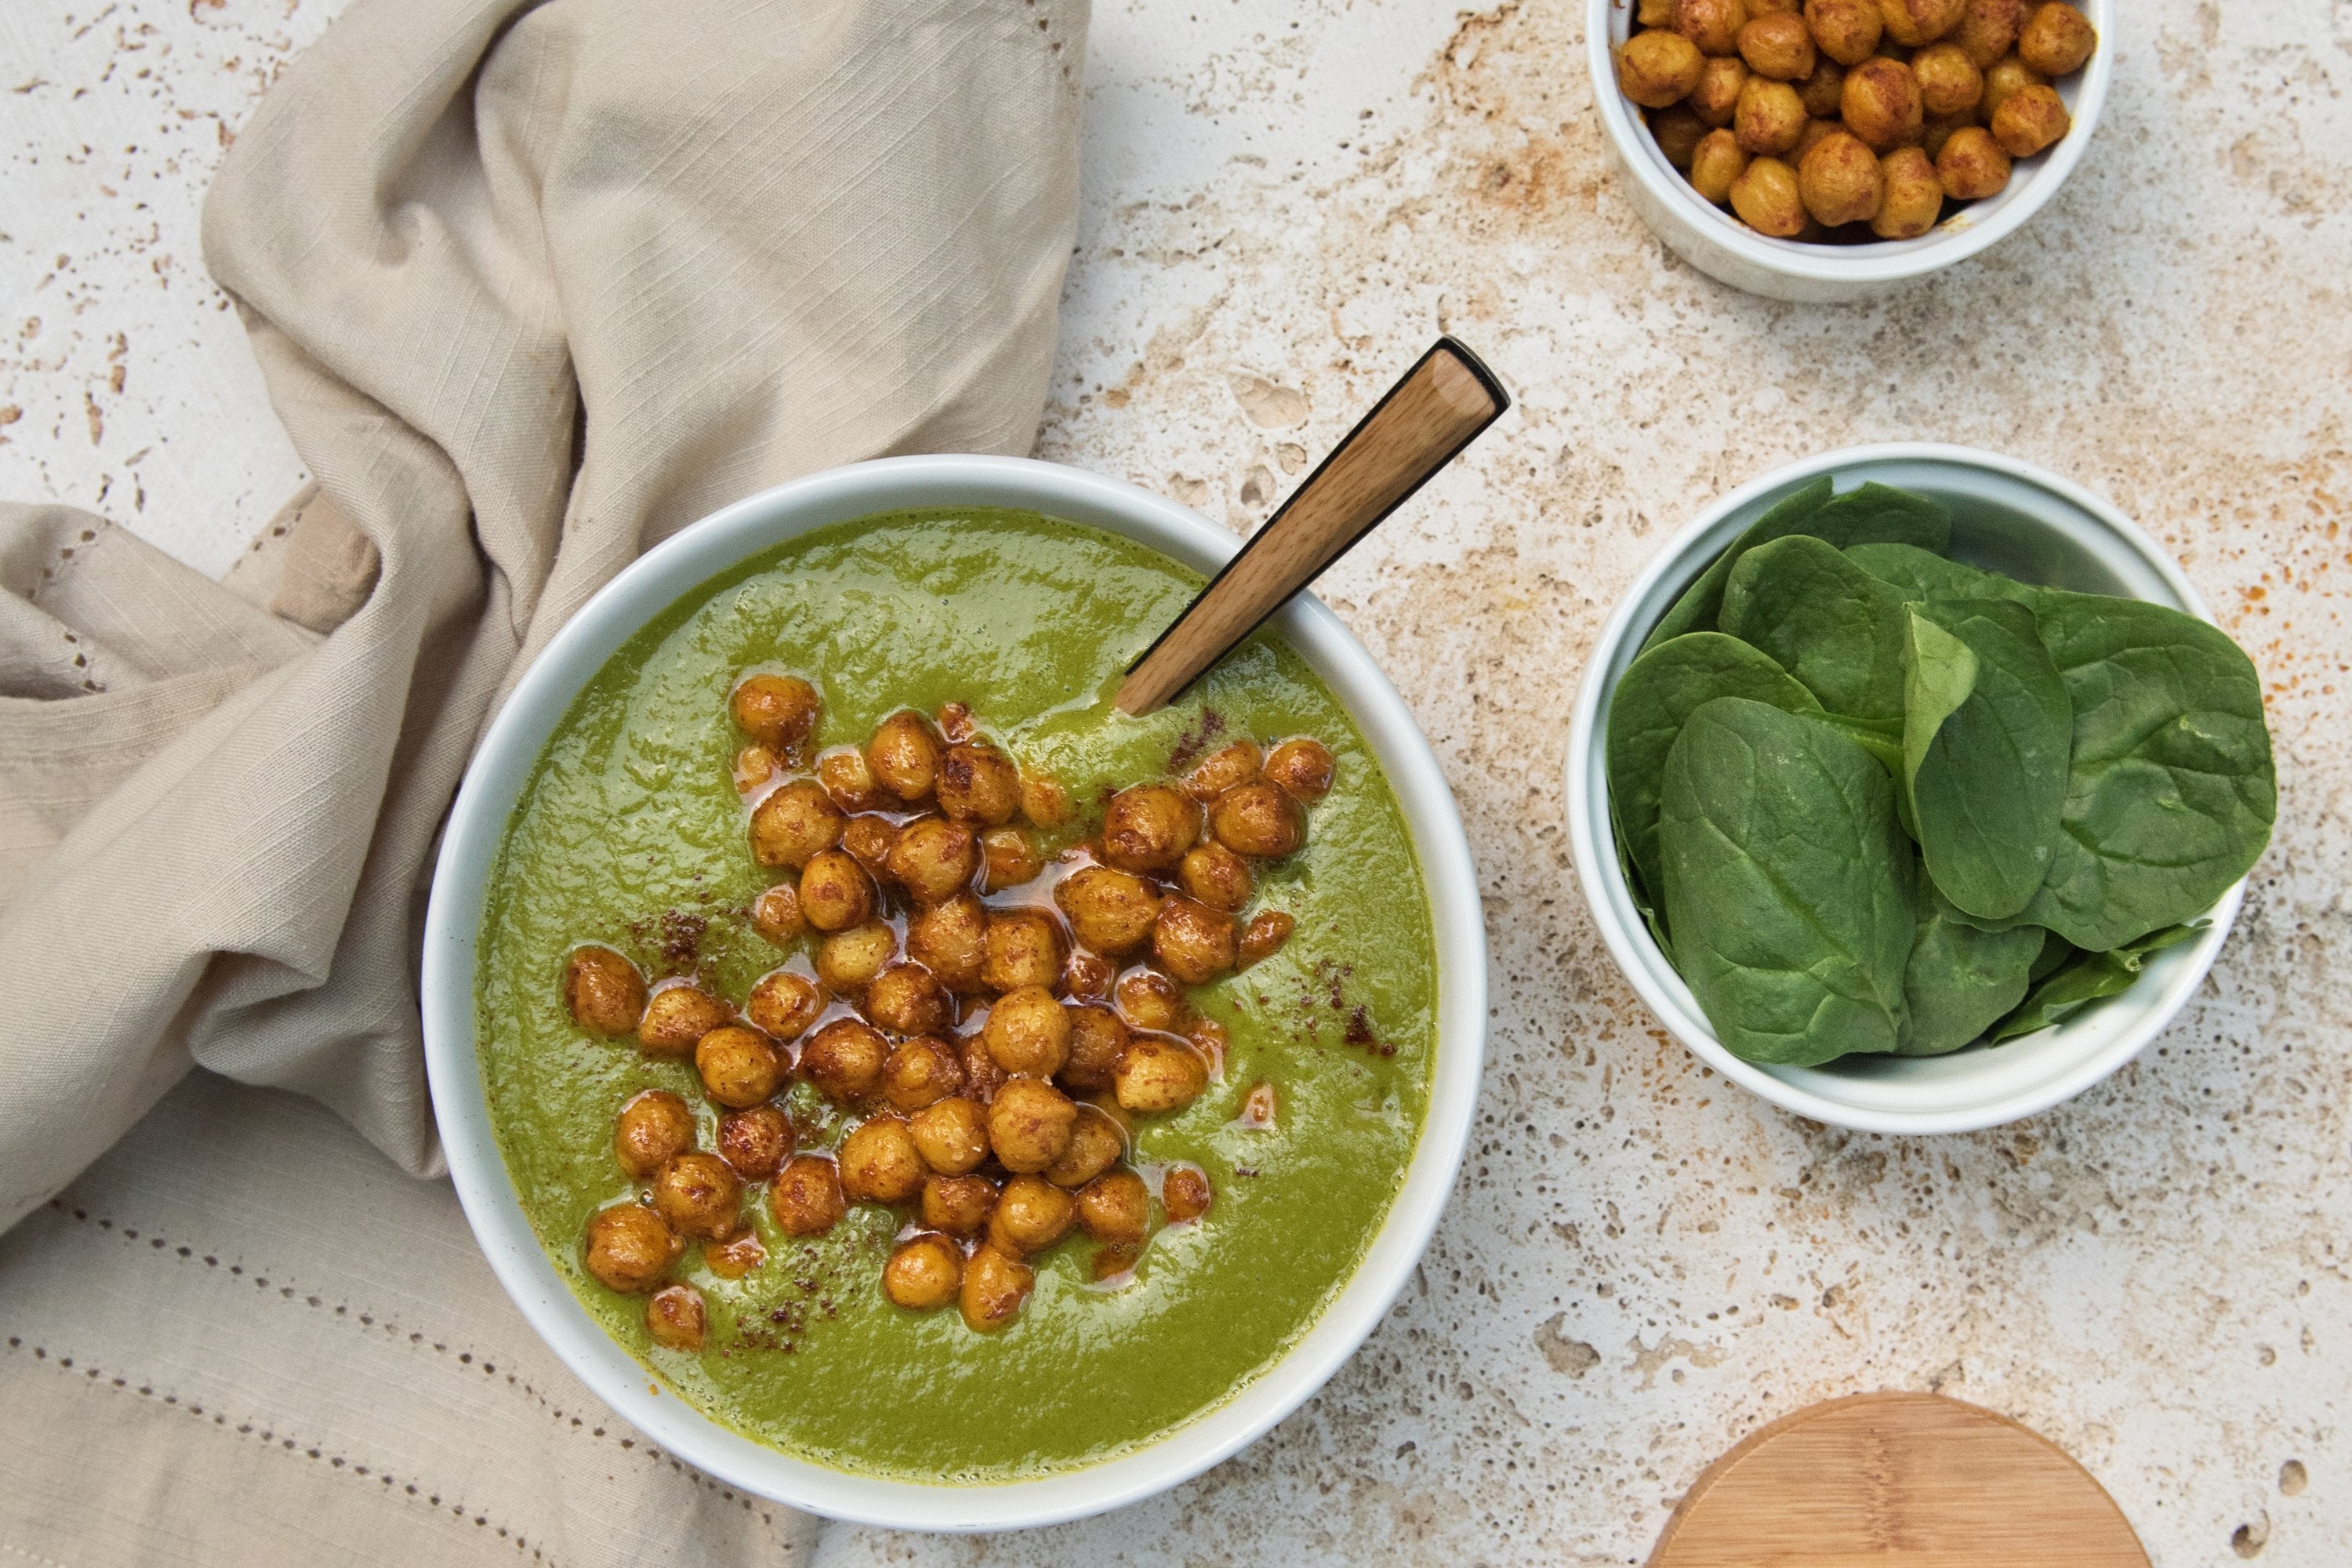 Caramelized Leek Soup with Turmeric Toasted Chickpeas